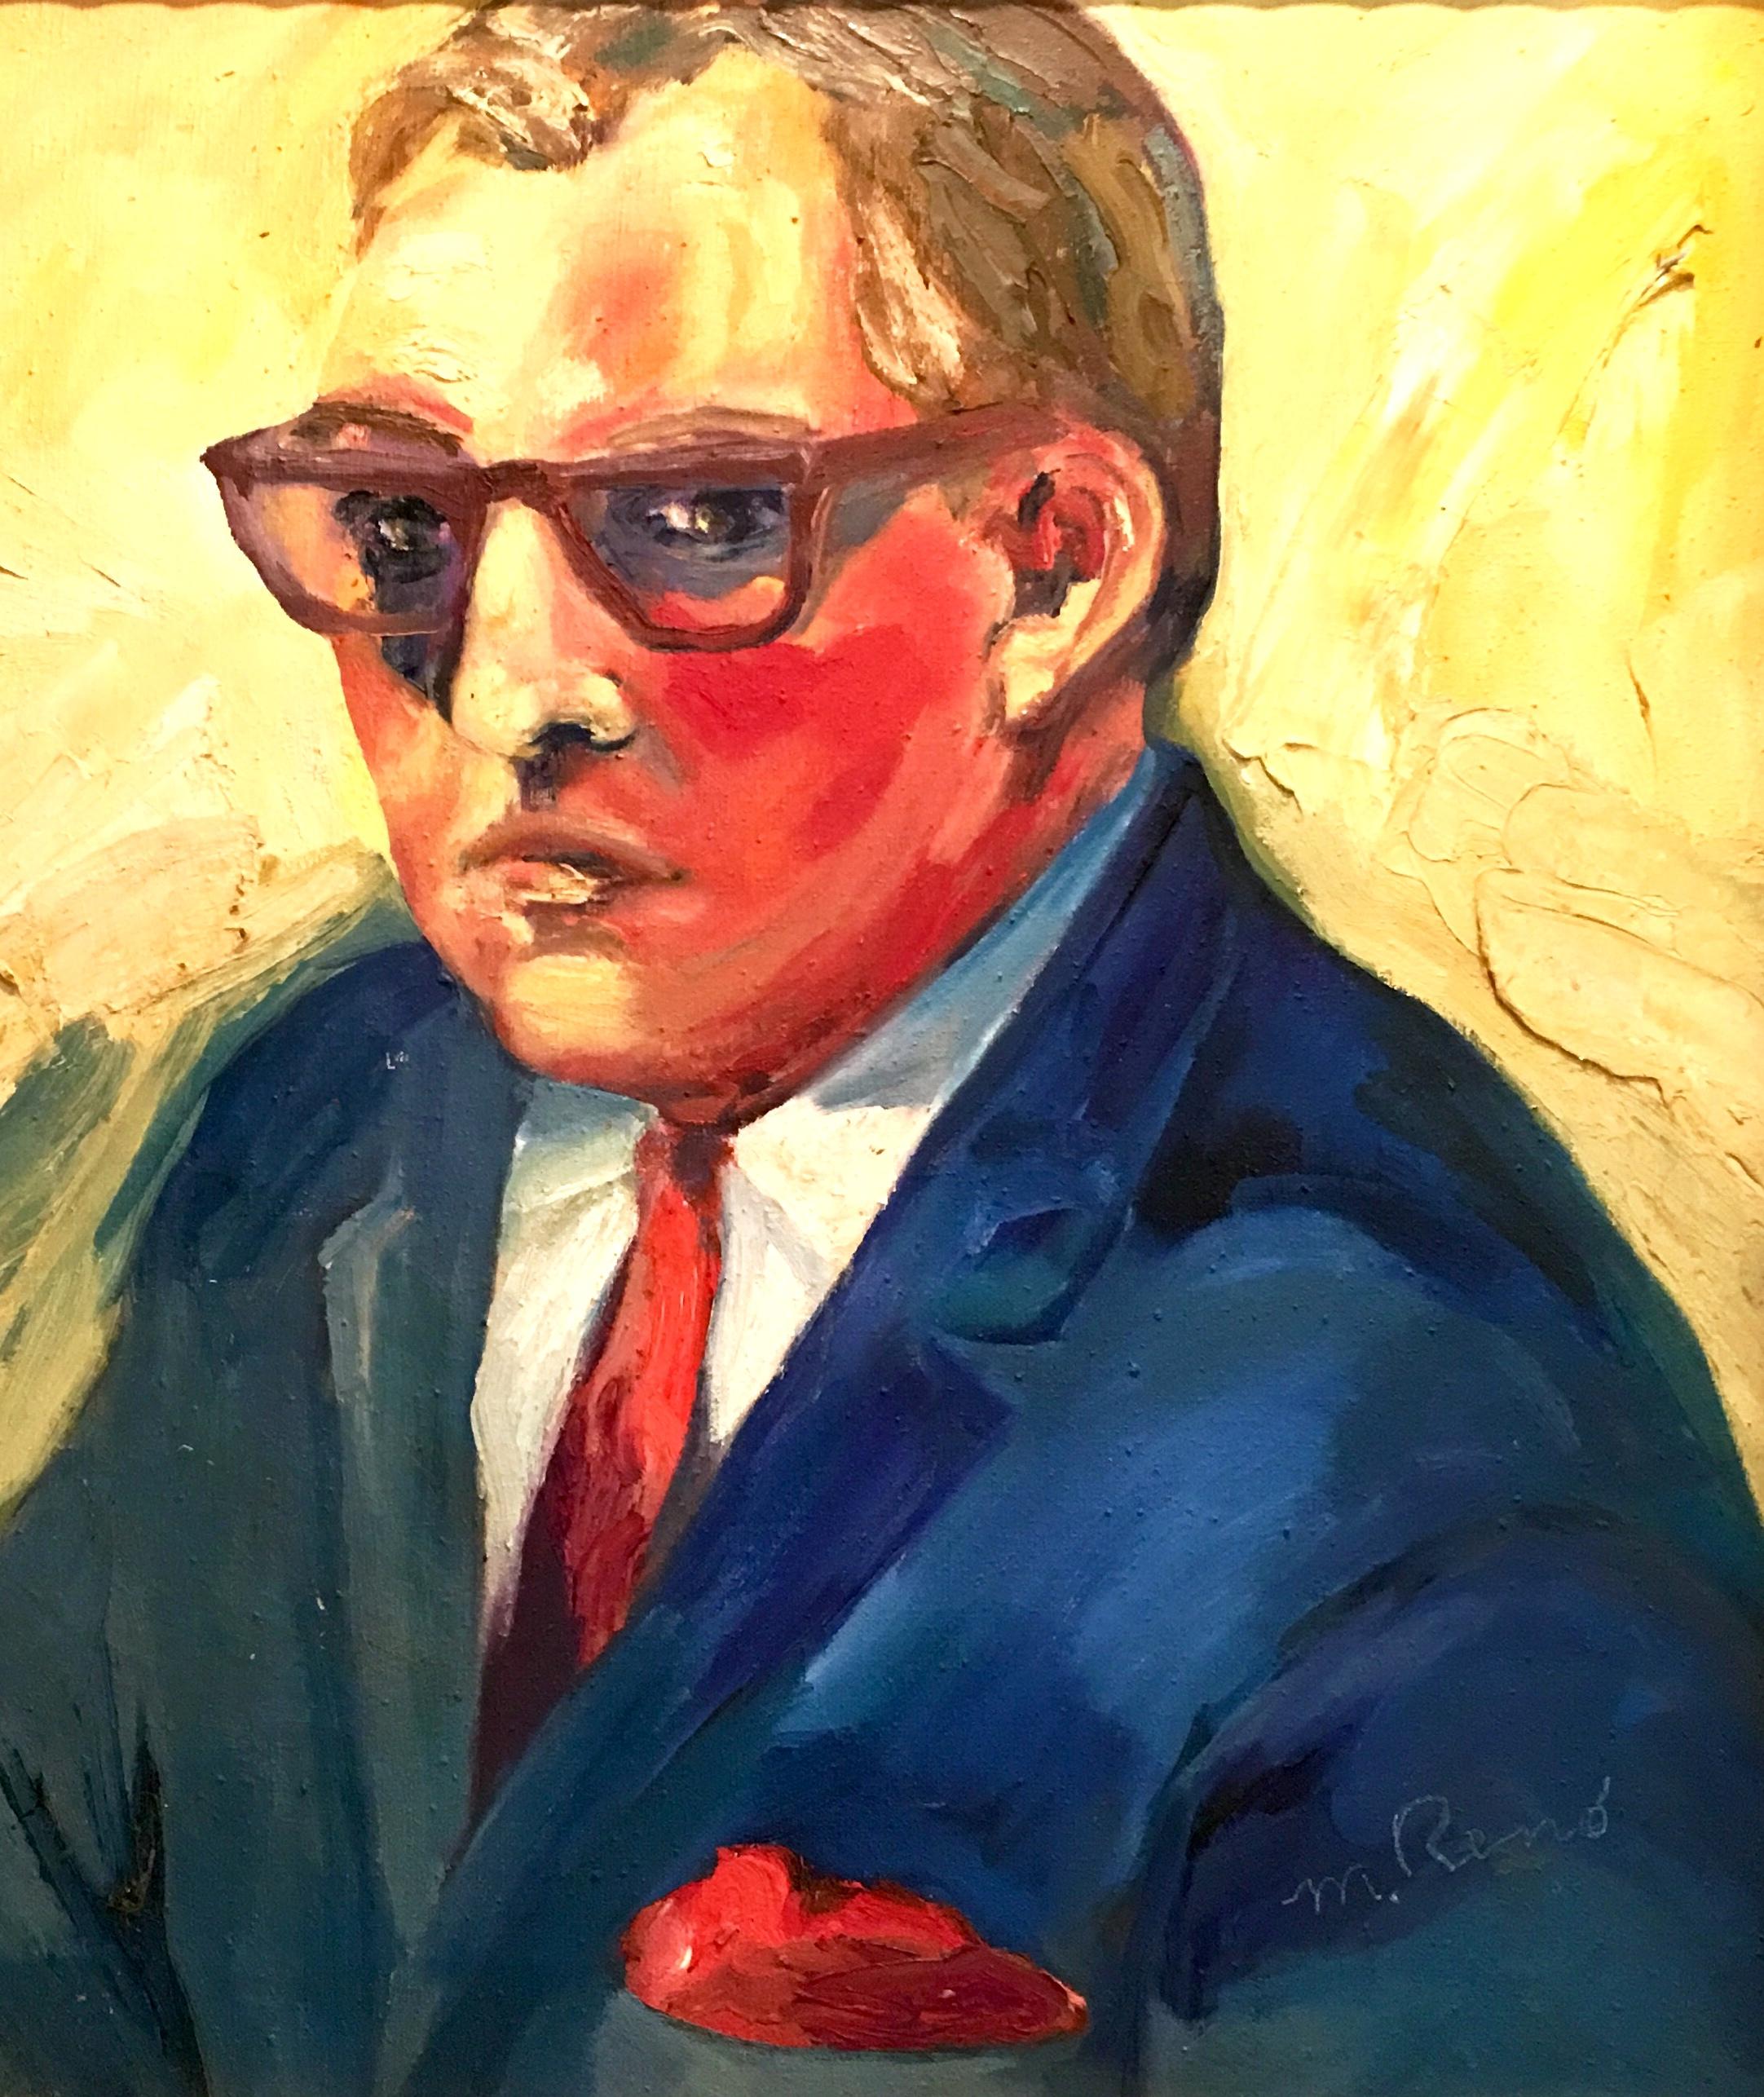 20th century original oil on canvas painting by, M. Reno. This impasto style painting features a male portrait of a man in an electric blue suit with a red tie on mostly yellow background. Signed 